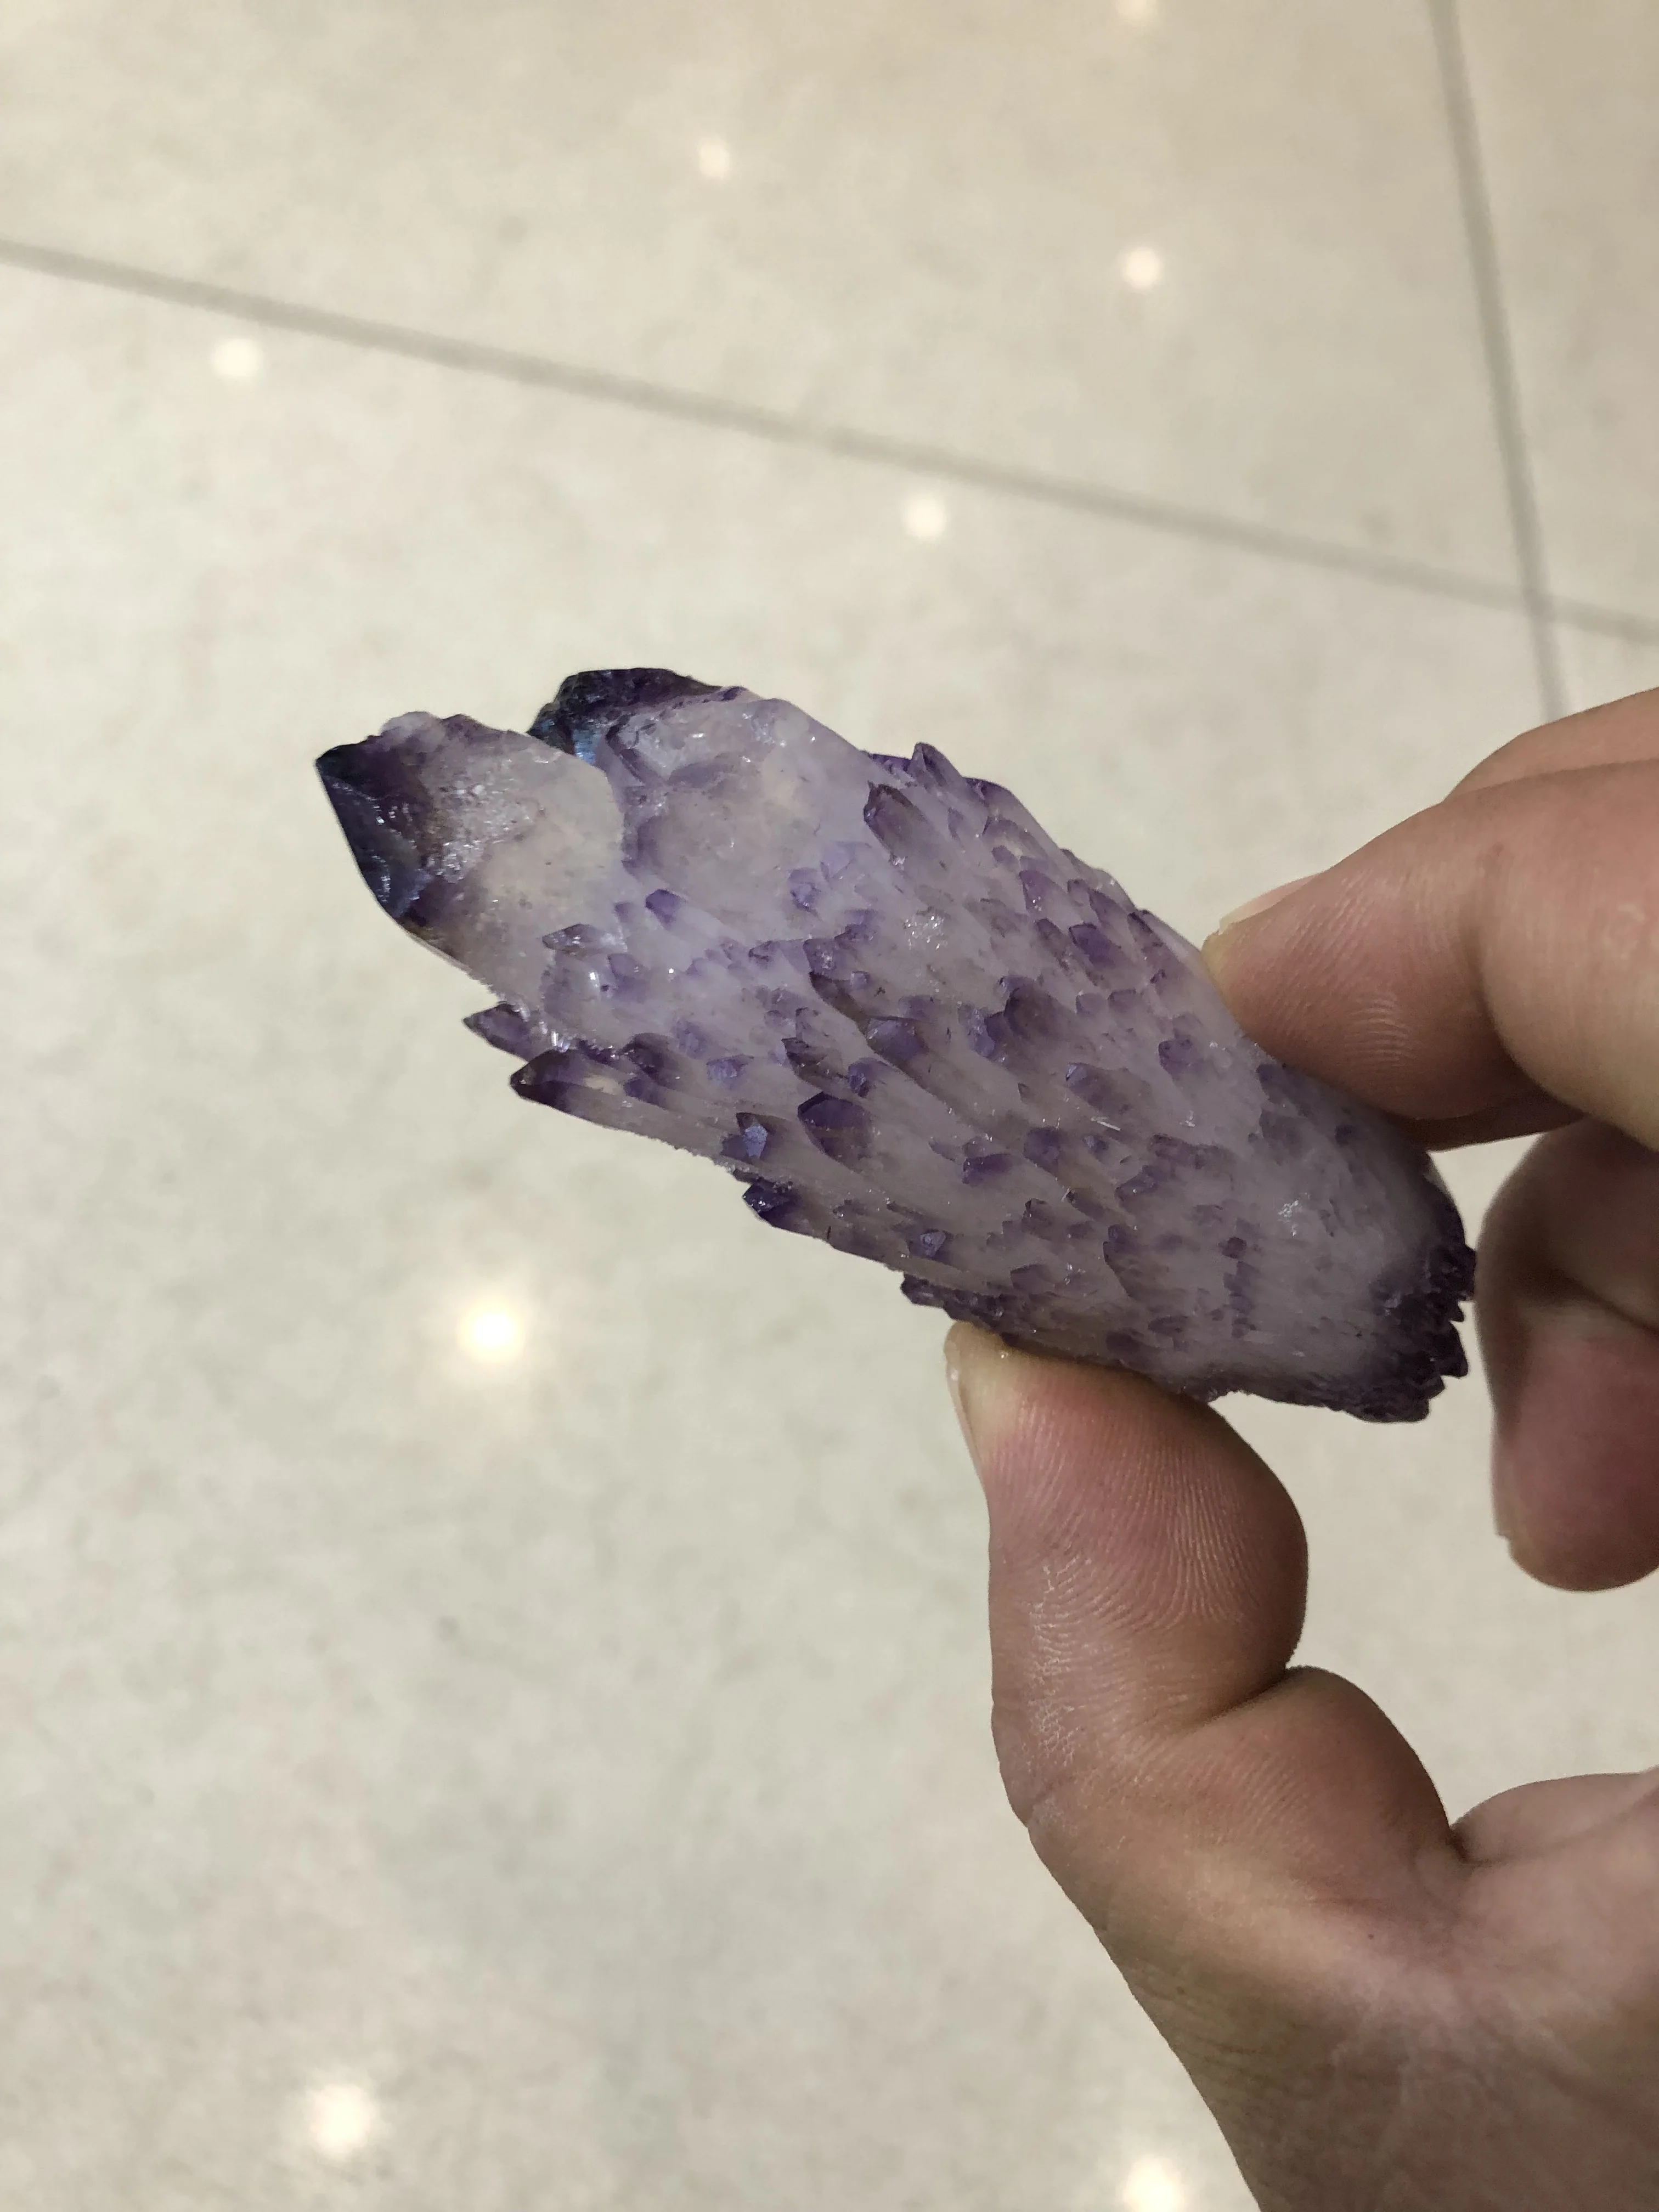 500G Making Jewelry Nature Stone Nature Crystal A Symbiont Of Amethyst And White Crystal Energy Healing Crystal Gem Ornaments